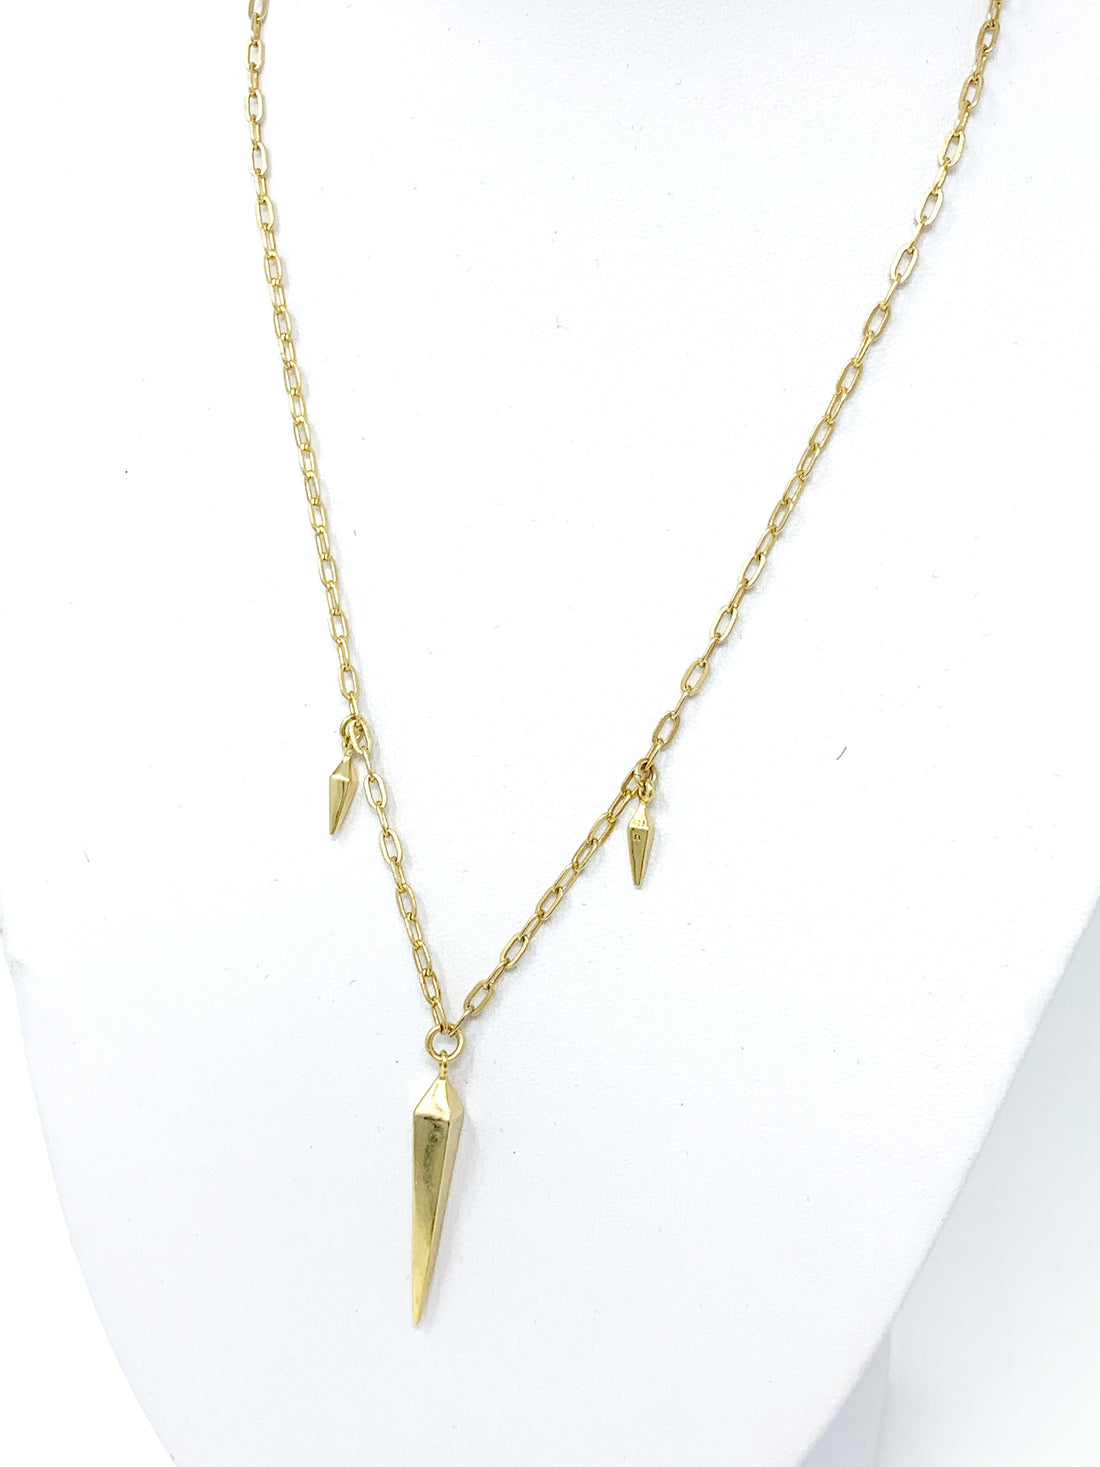 Triple Spike Necklace in Gold